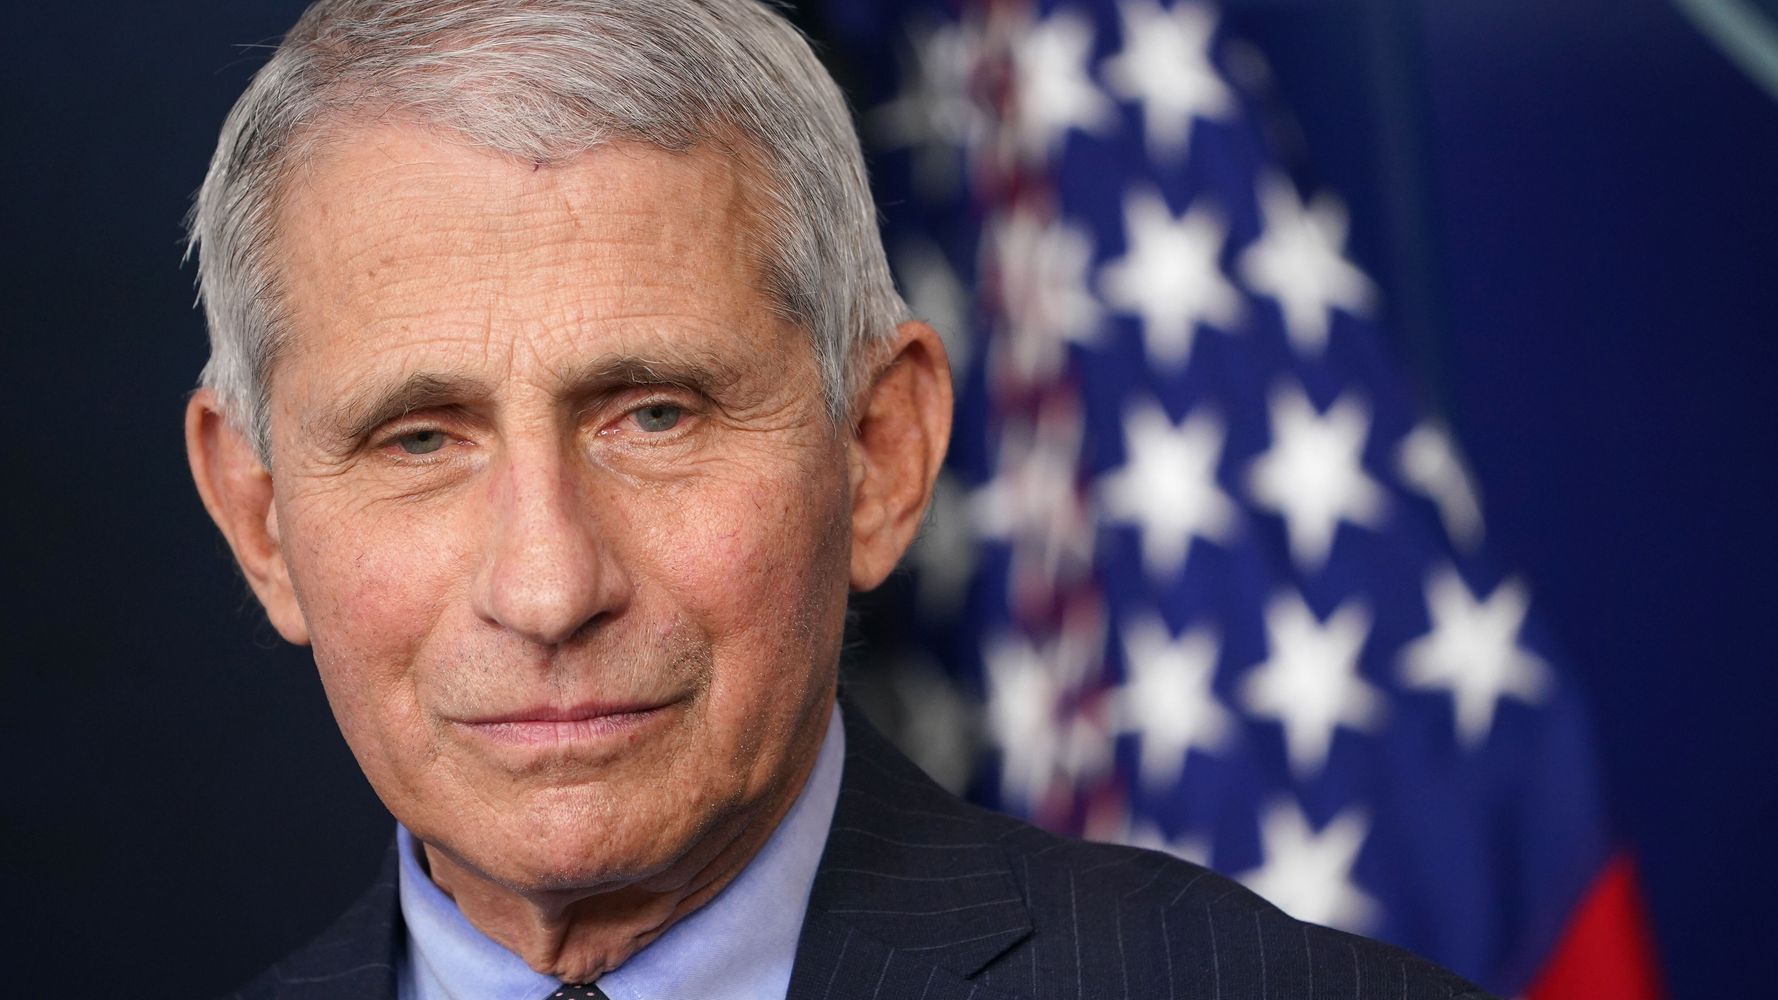 Anthony Fauci sounds the alarm over the ‘alarmingly high’ level of new COVID-19 cases